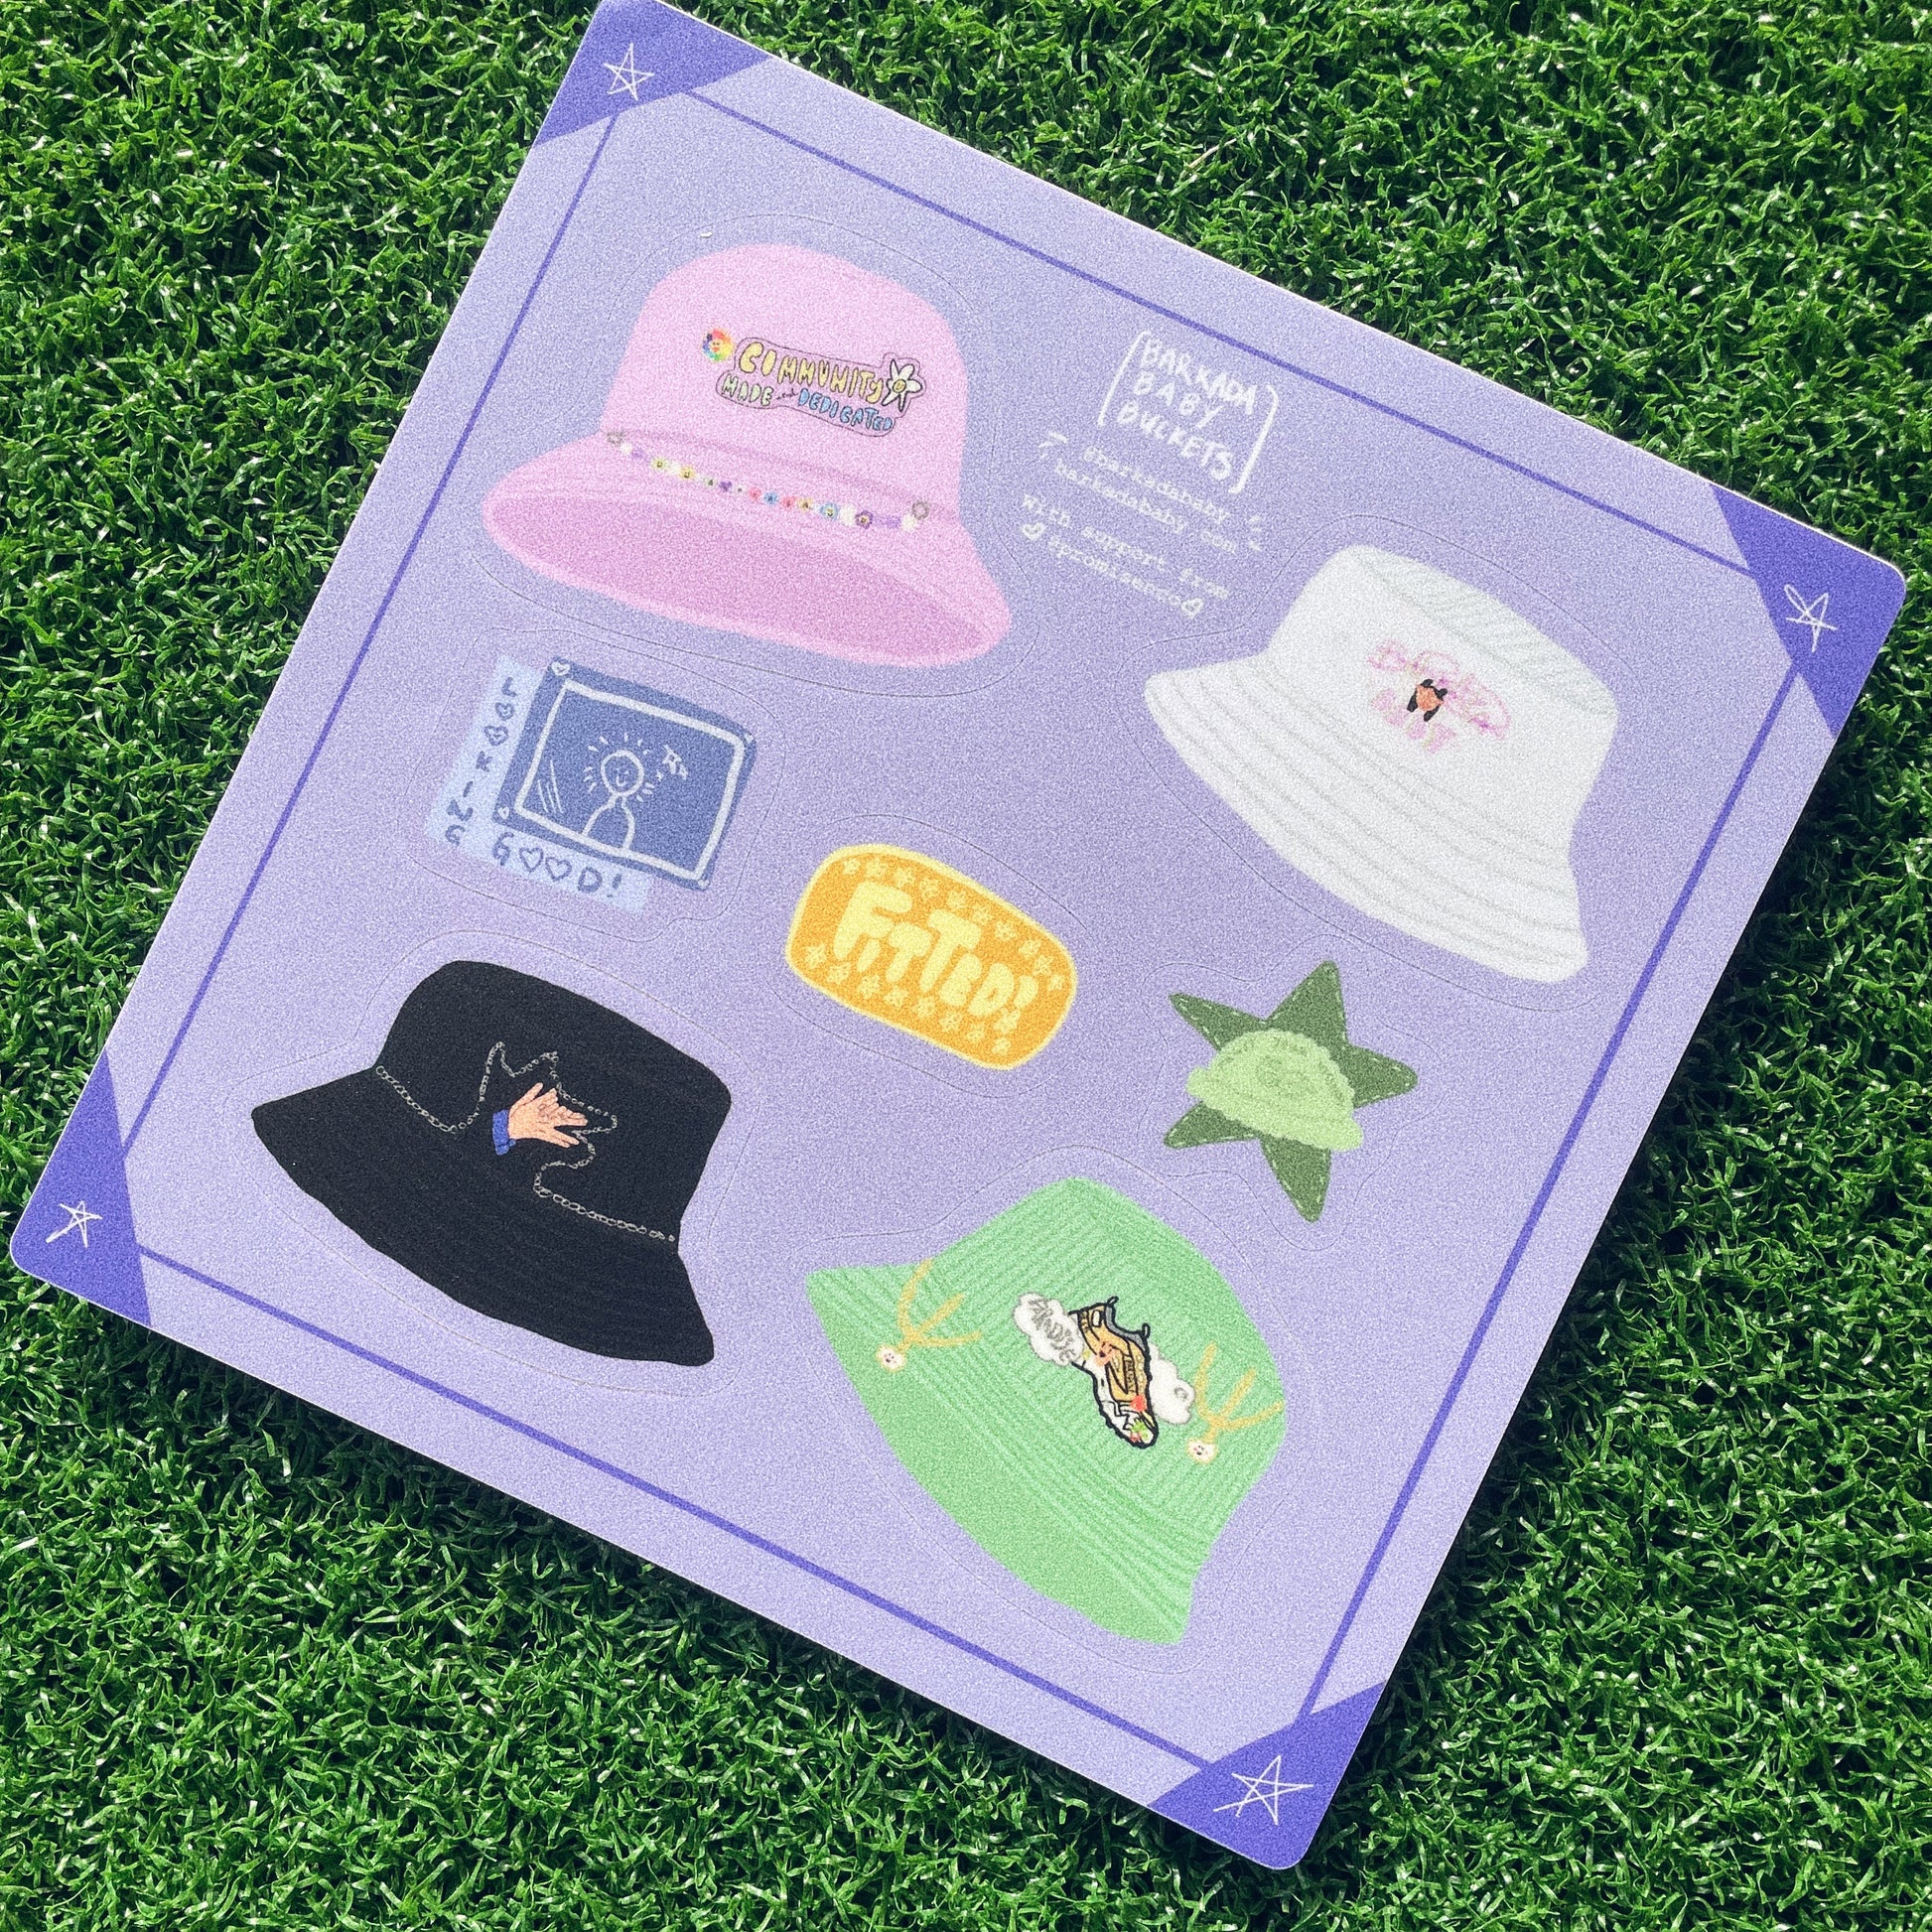 fake grass background with a purple sticker sheet square laying on top. Each sticker is a mini version of a bucket hat made by barkada baby with a "lookin good" sticker, yellow fitted sticker, and a green fuzzy bucket hat sticker with a star in the background